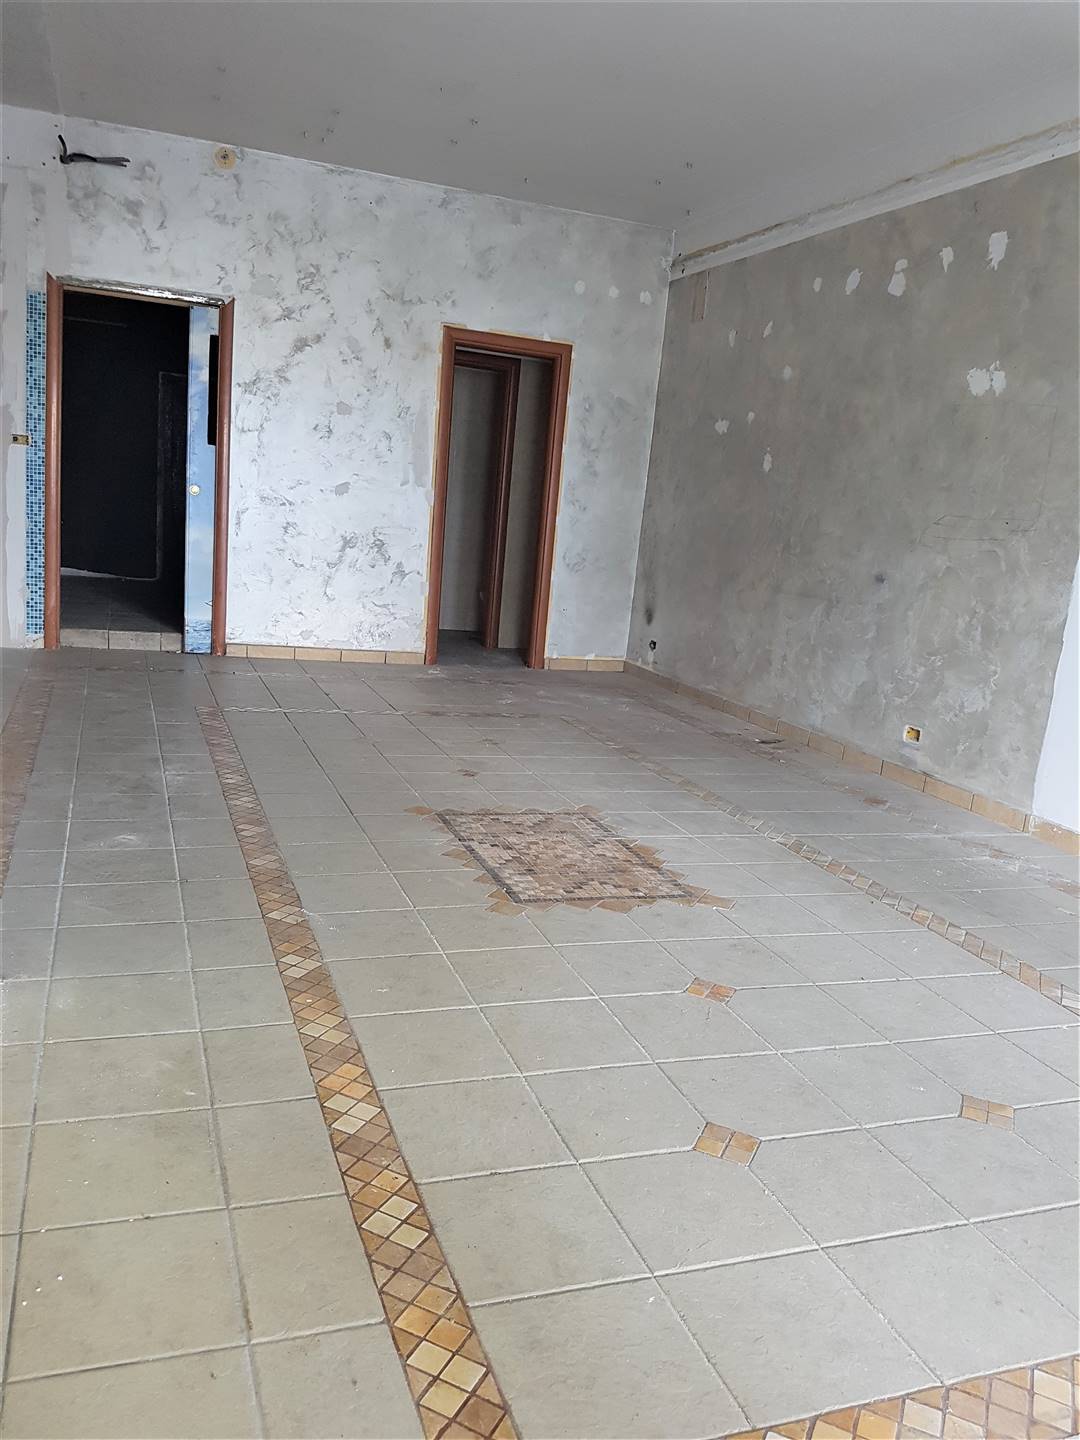 STAZIONE DI MONTALTO, MONTALTO UFFUGO, Commercial property for rent of 88 Sq. mt., Excellent Condition, composed by: 1 Room, 1 Bathroom, Price: € 700